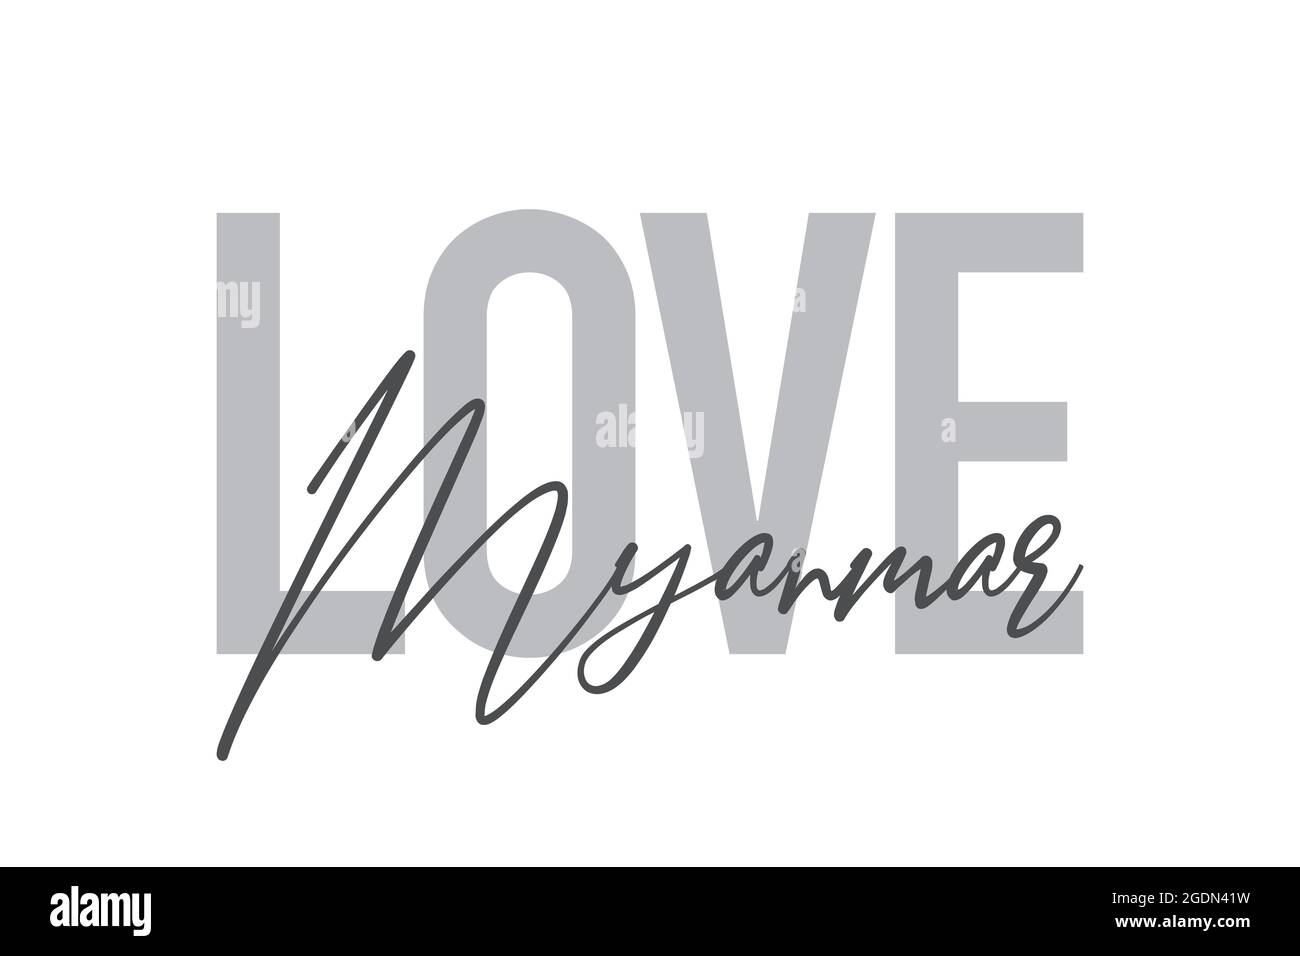 Modern, simple, minimal typographic design of a saying 'Love Myanmar' in tones of grey color. Cool, urban, trendy and playful graphic vector art with Stock Photo